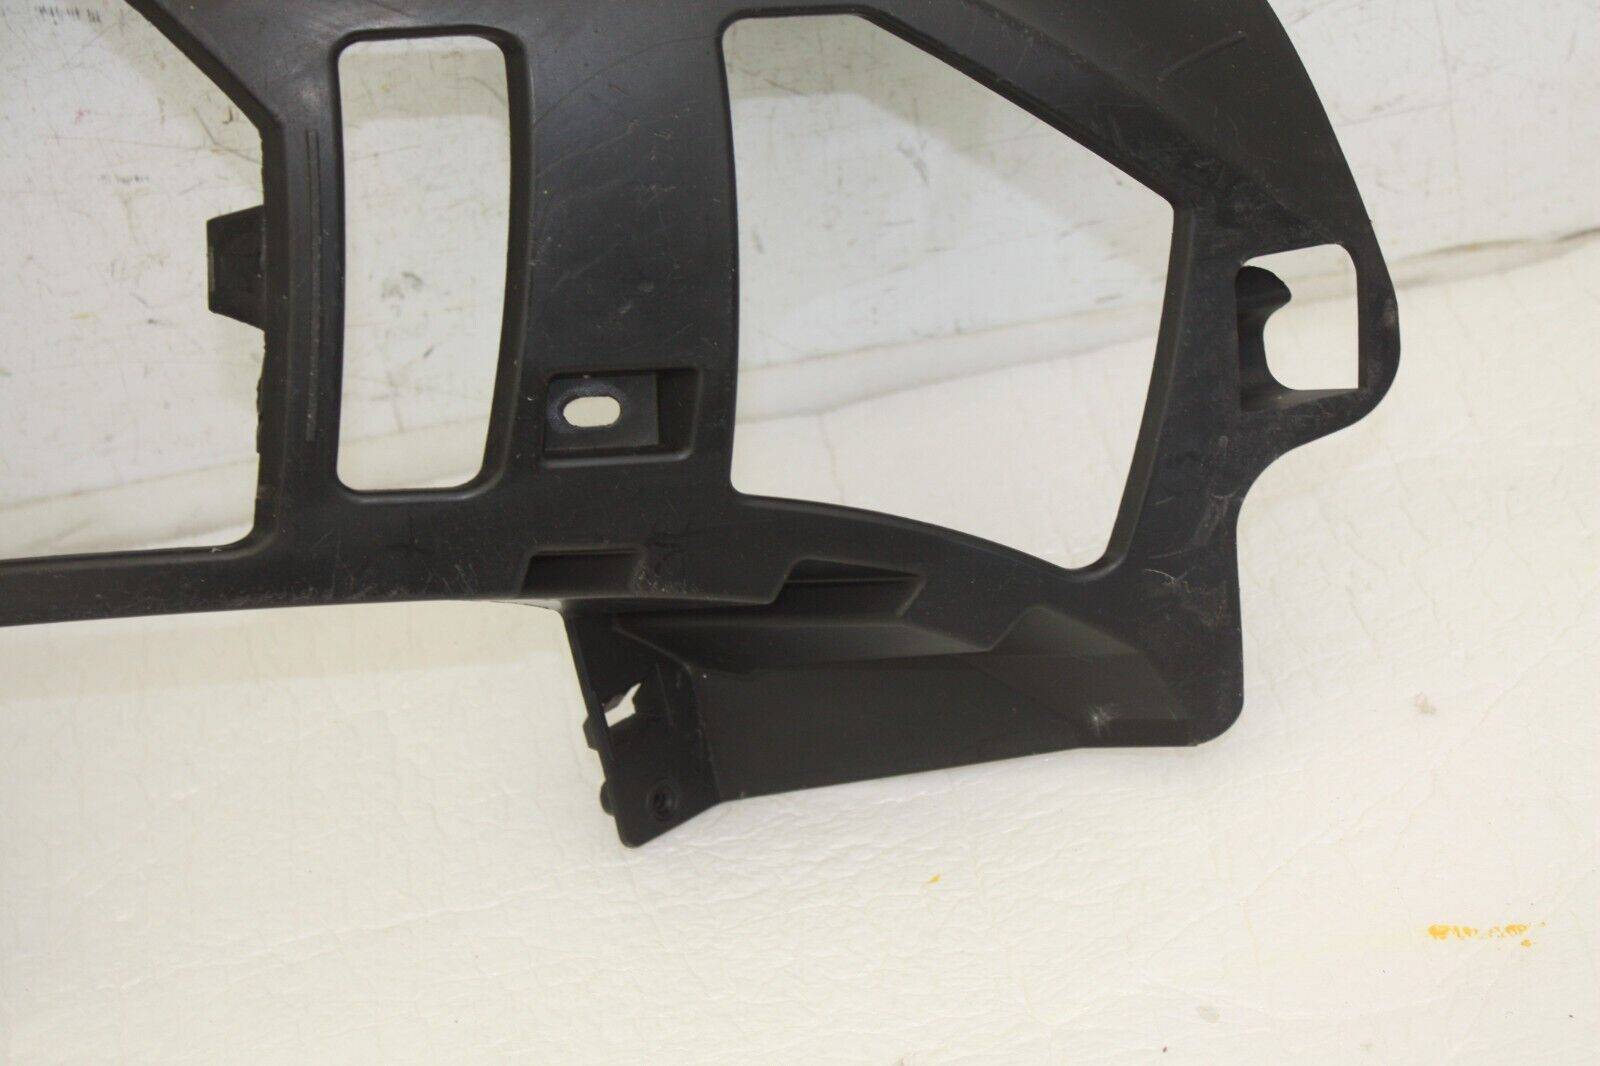 Peugeot-3008-Front-Bumper-Right-Side-Bracket-2017-TO-2021-9815337580-Genuine-176385381019-6